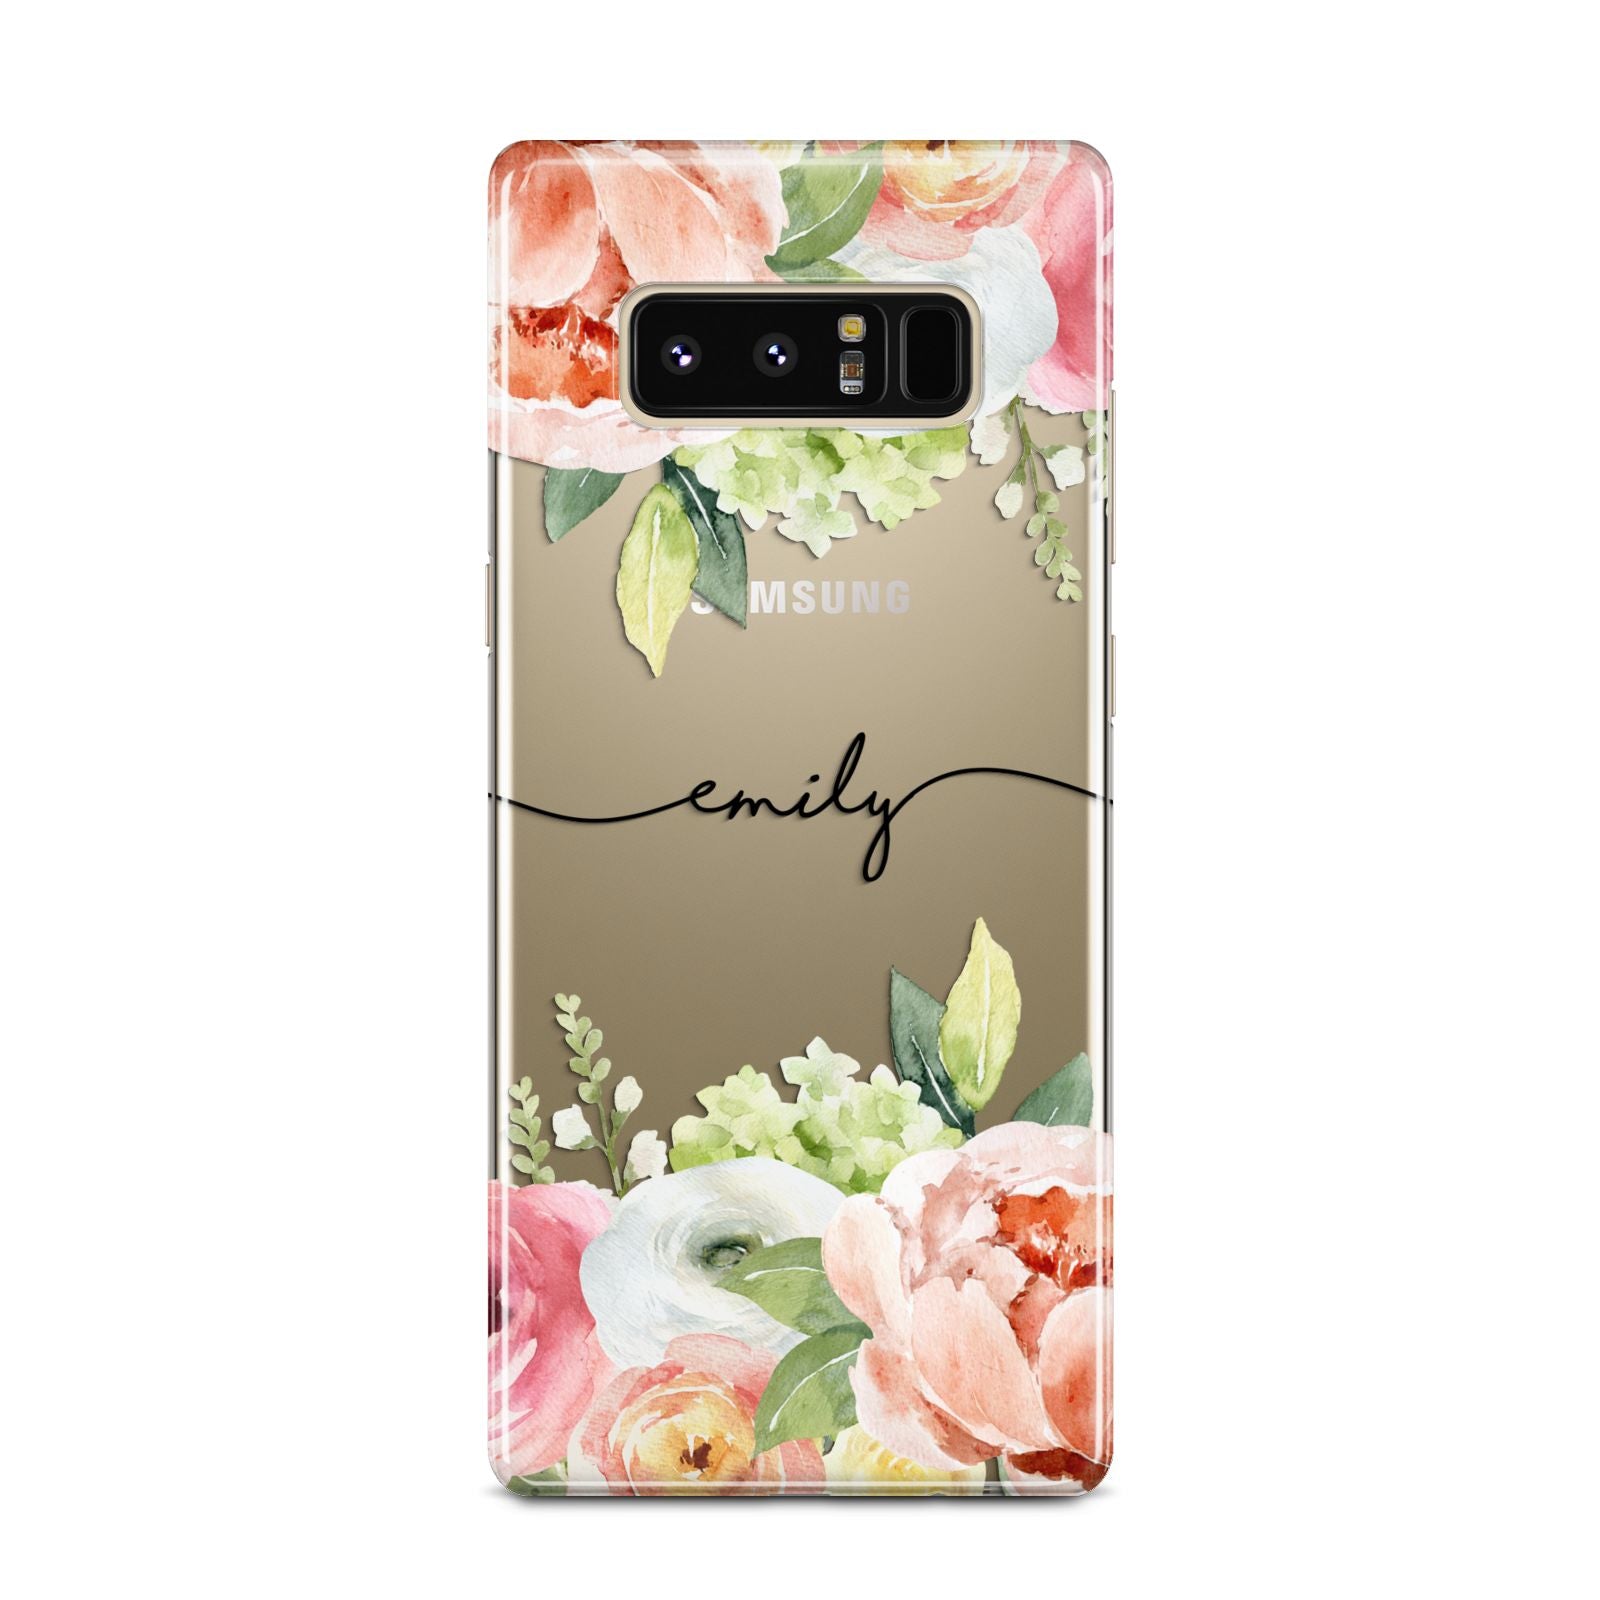 Personalised Flowers Samsung Galaxy Note 8 Case